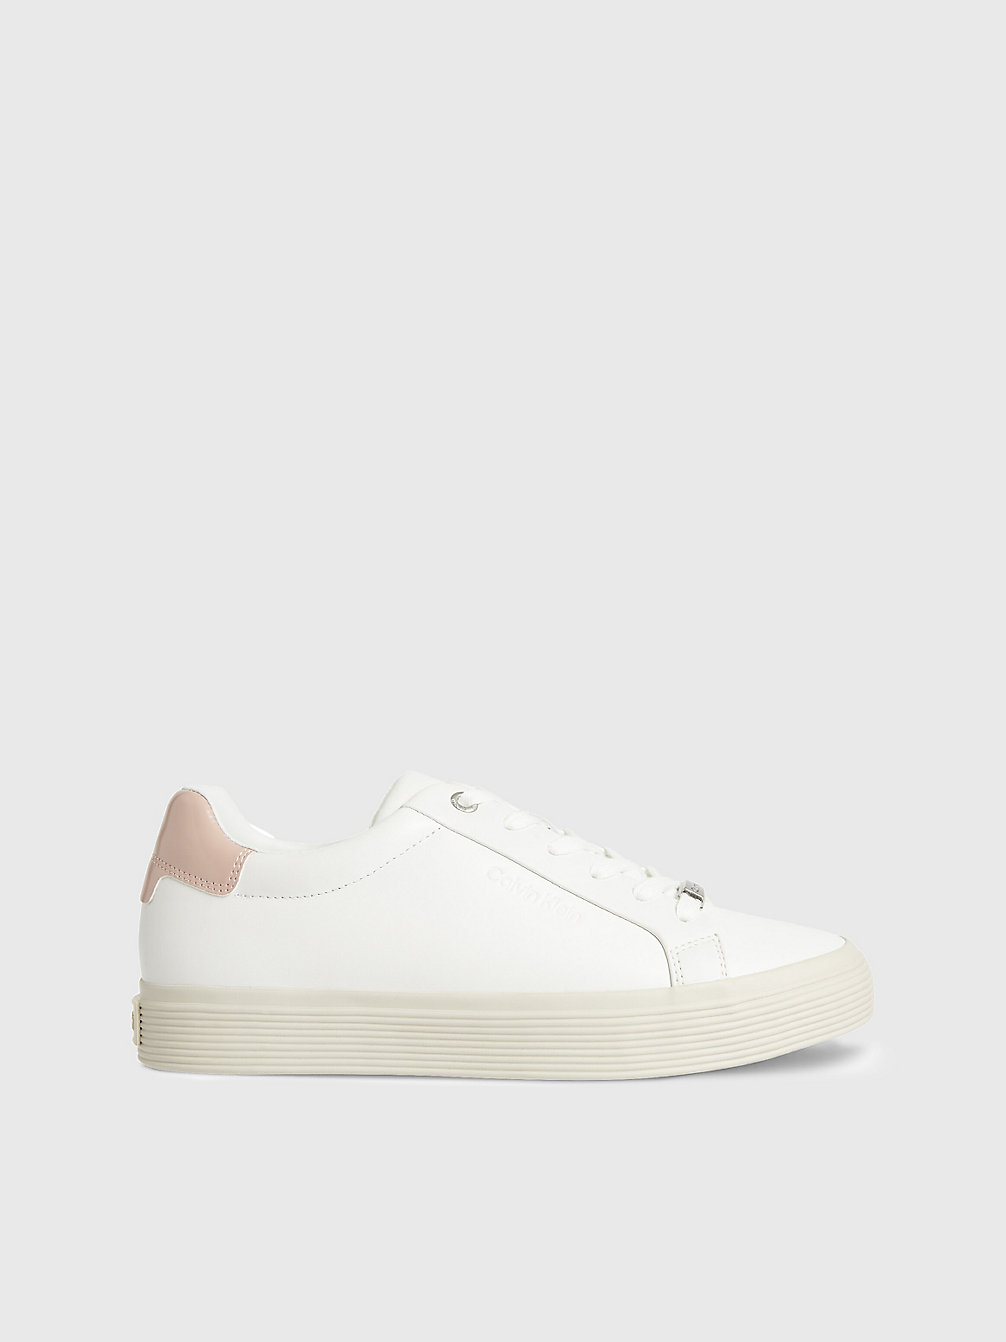 WHITE / PINK MIX Leather Trainers undefined women Calvin Klein